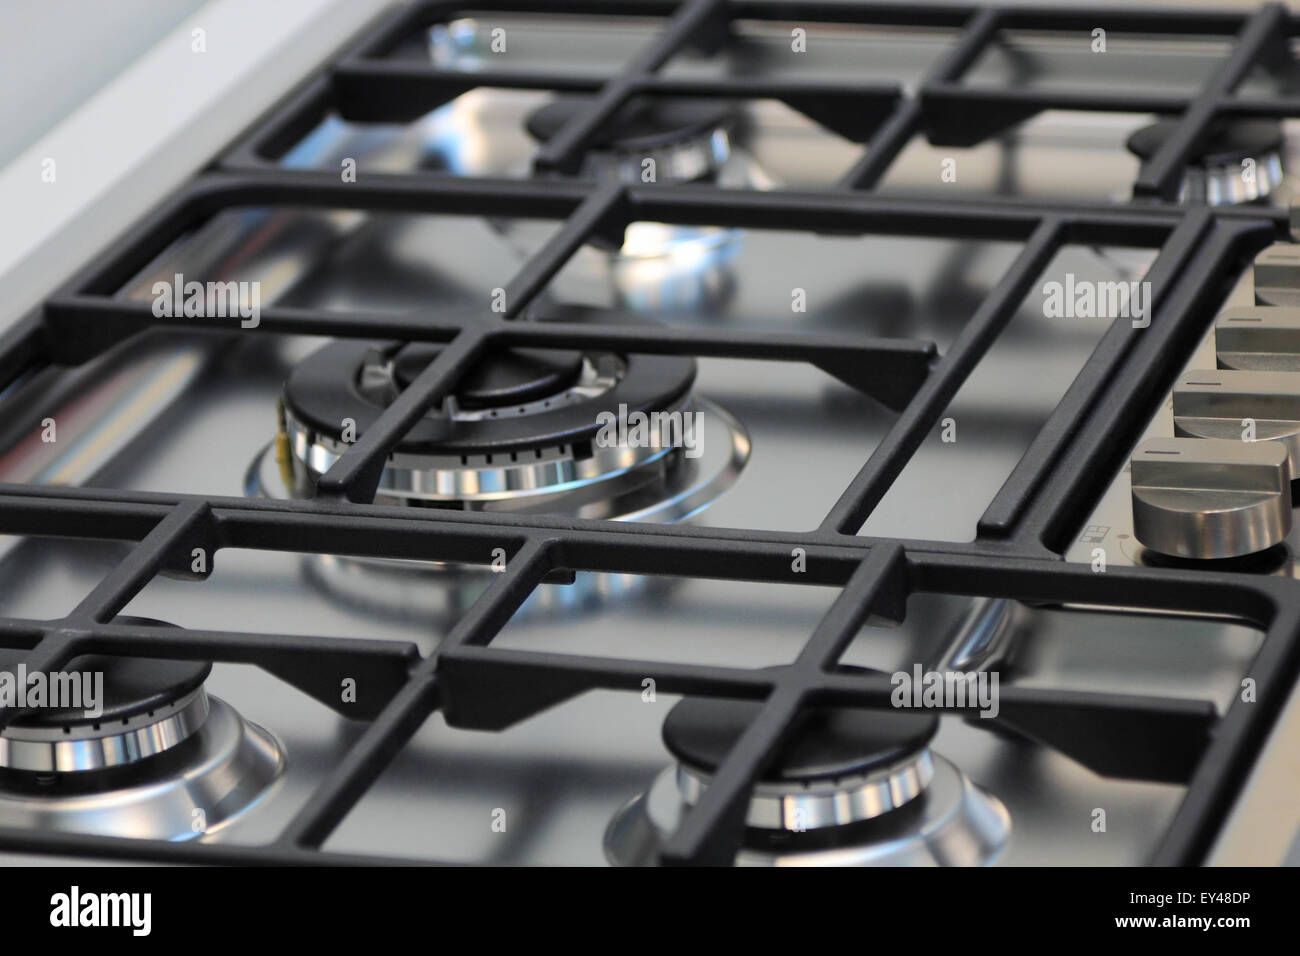 The upper part of gas cooking range. Stock Photo